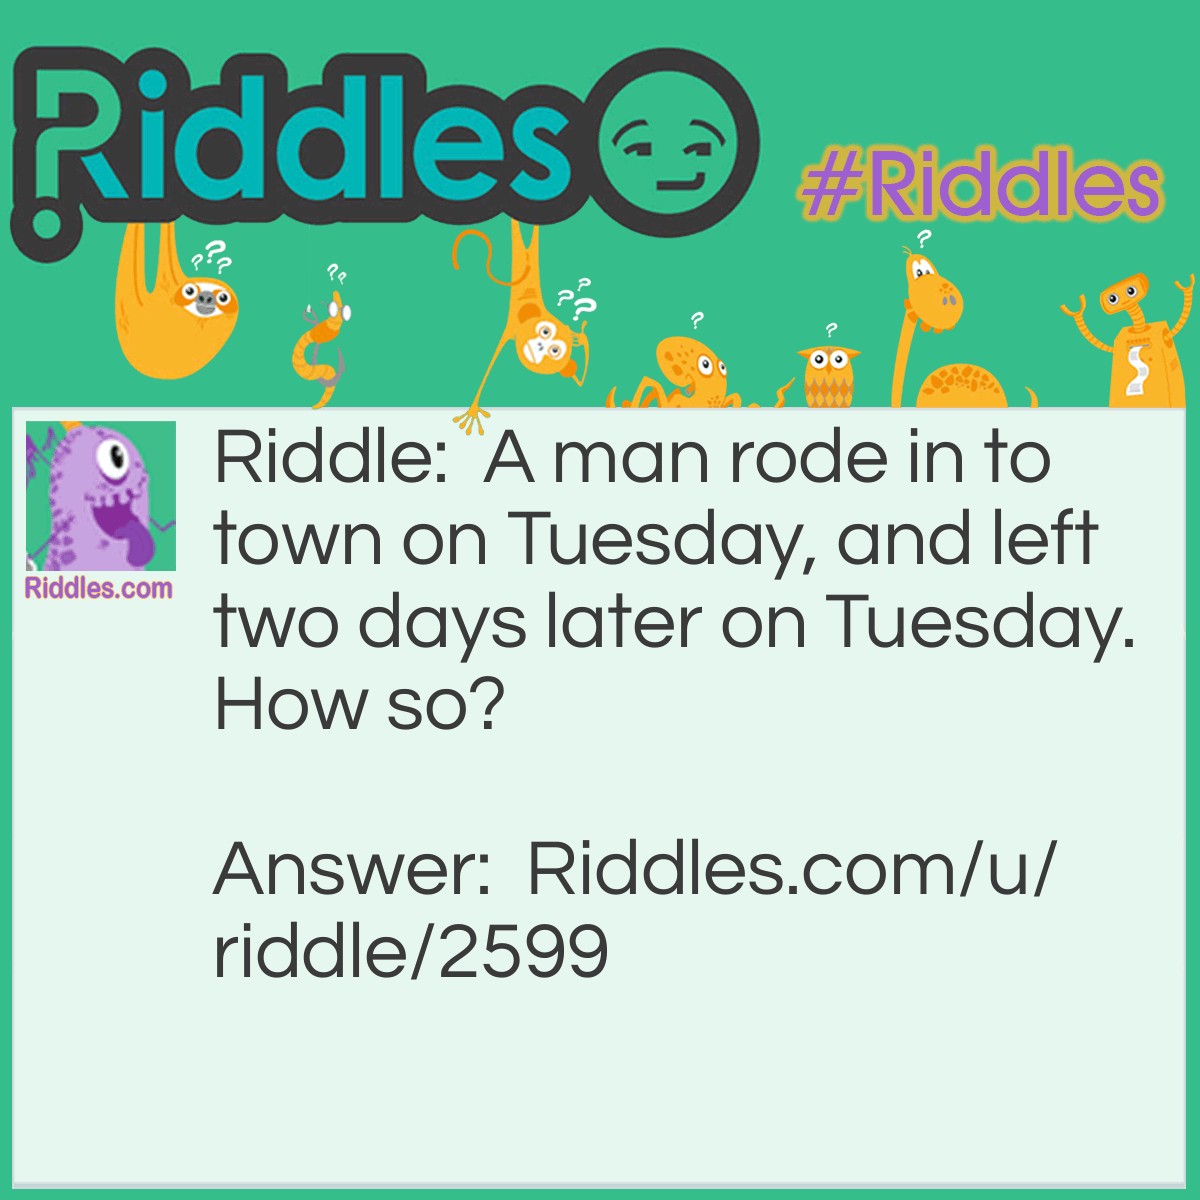 Riddle: A man rode in to town on Tuesday, and left two days later on Tuesday. How so? Answer: His horse's name was tuesday.